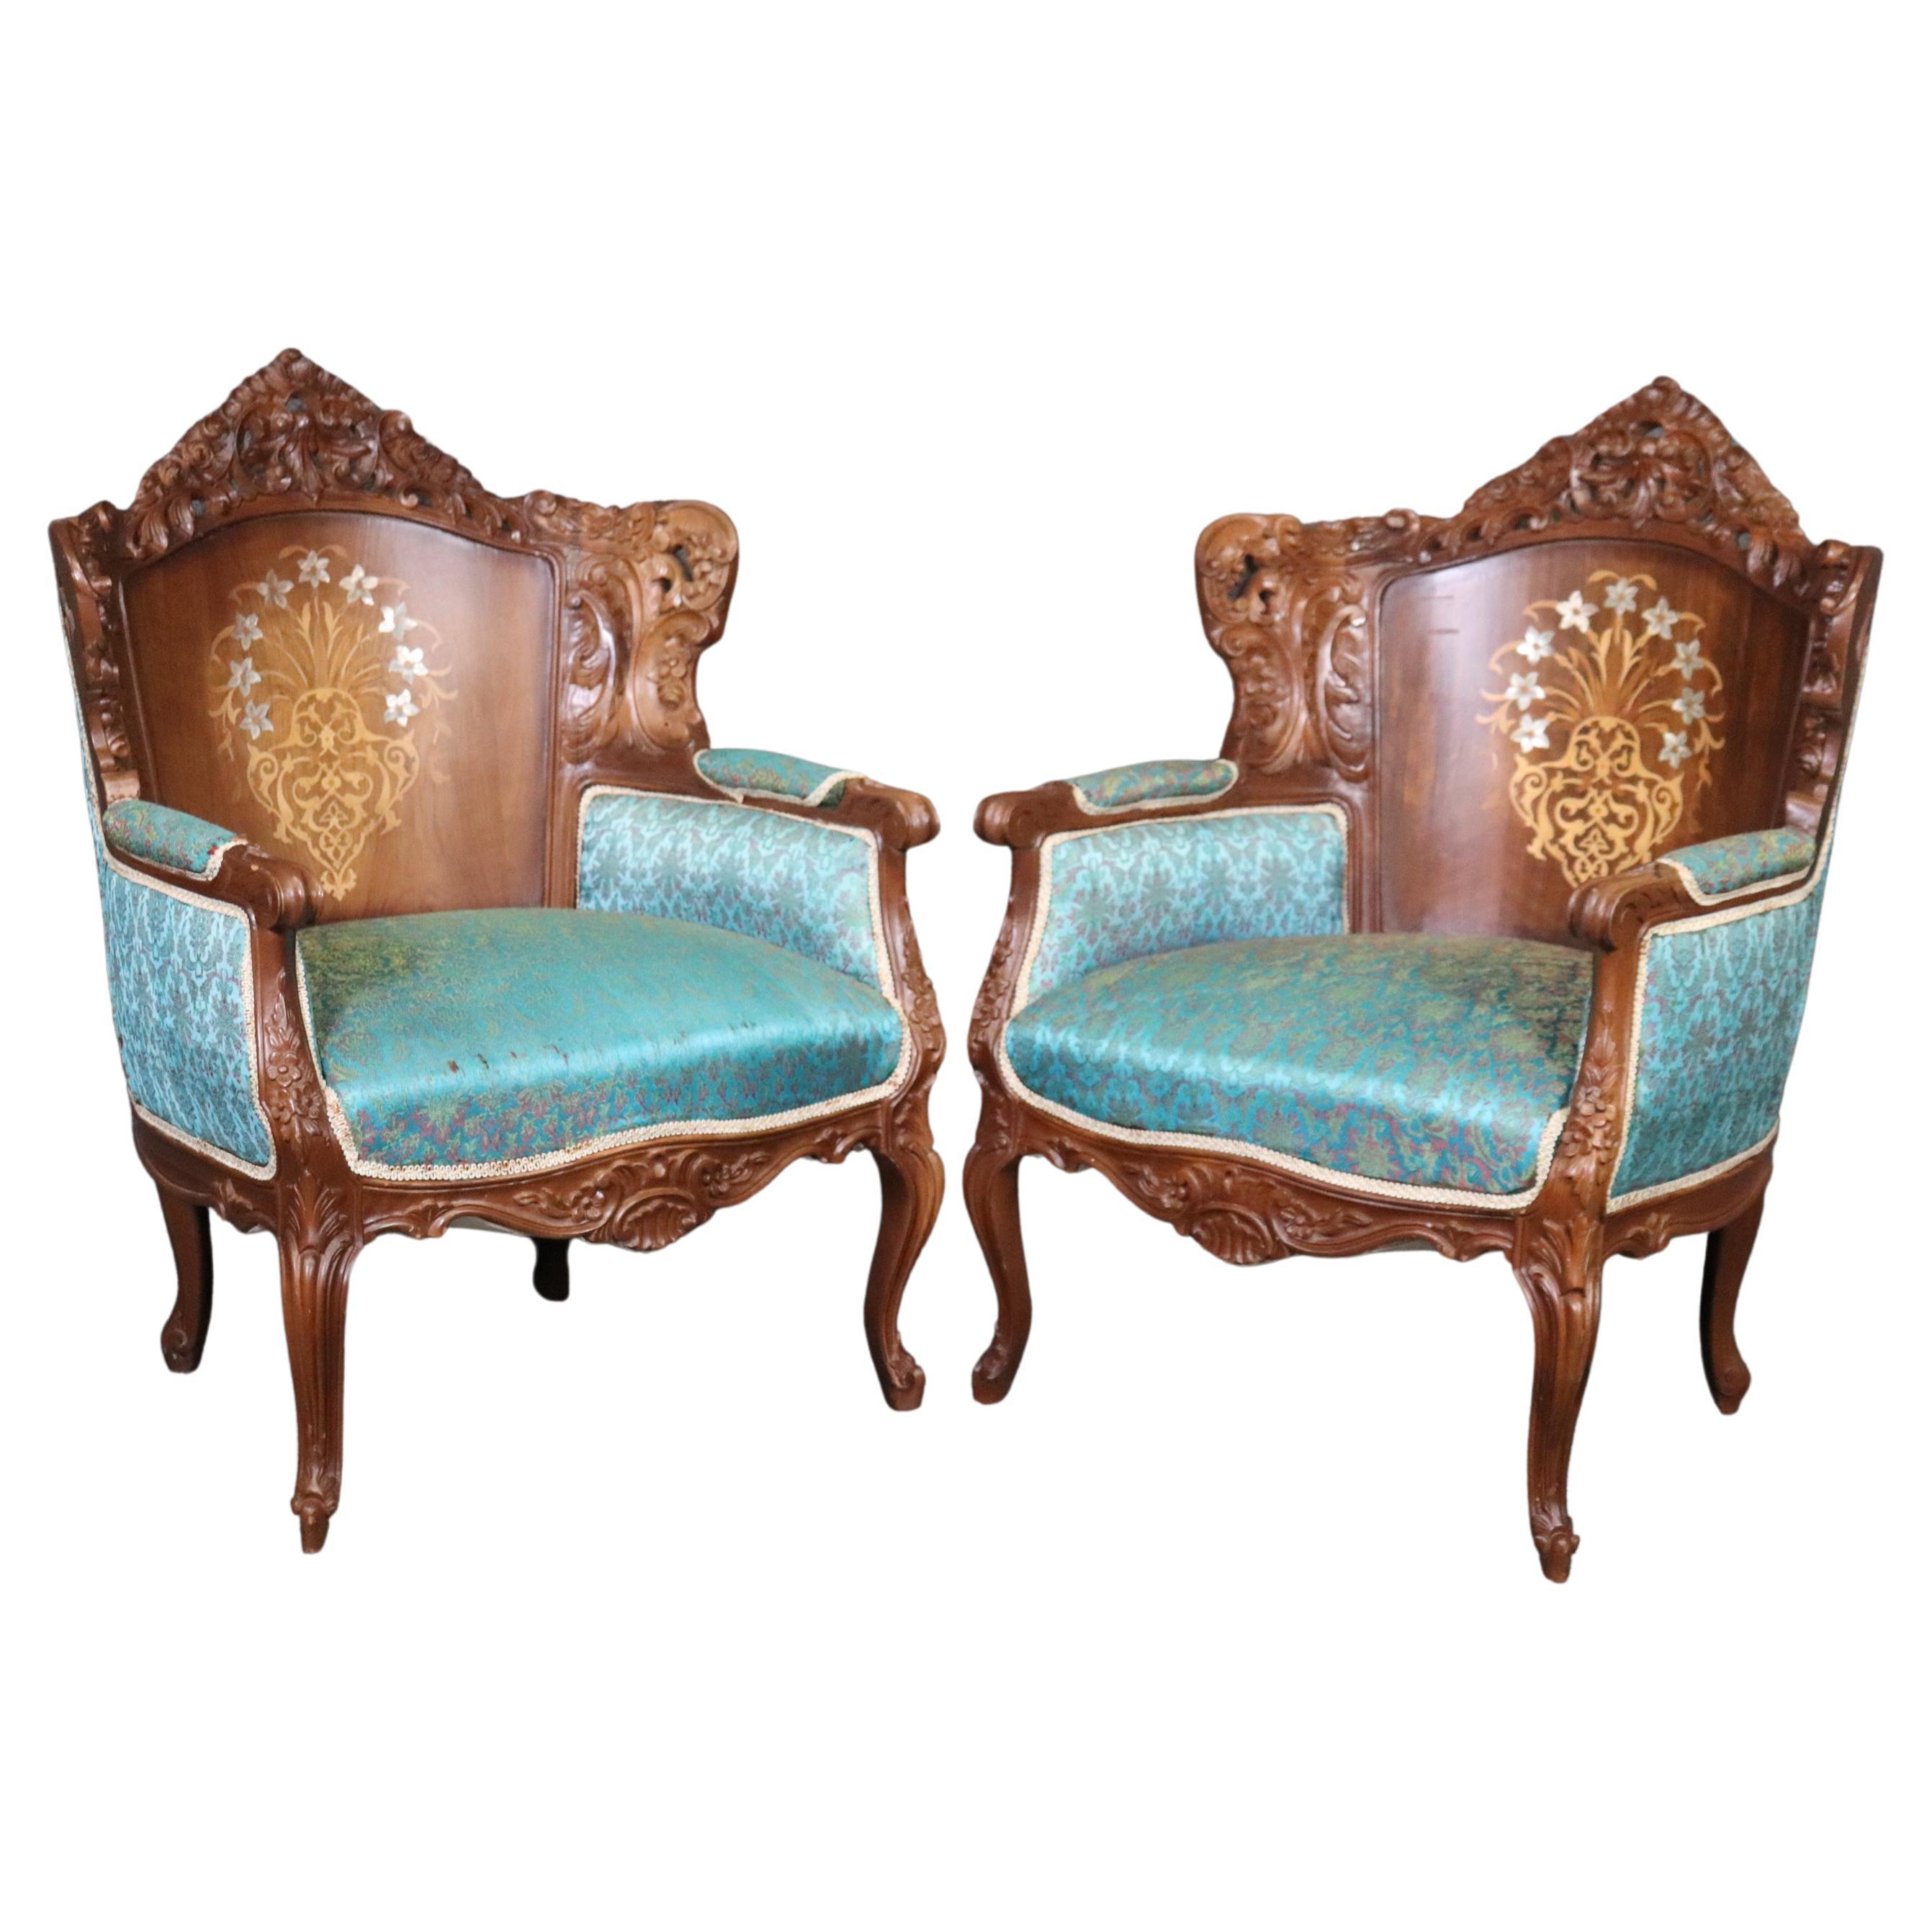 Pair of Carved Louis XV Style Armchairs Bergeres With Mother of Pearl Decoration For Sale